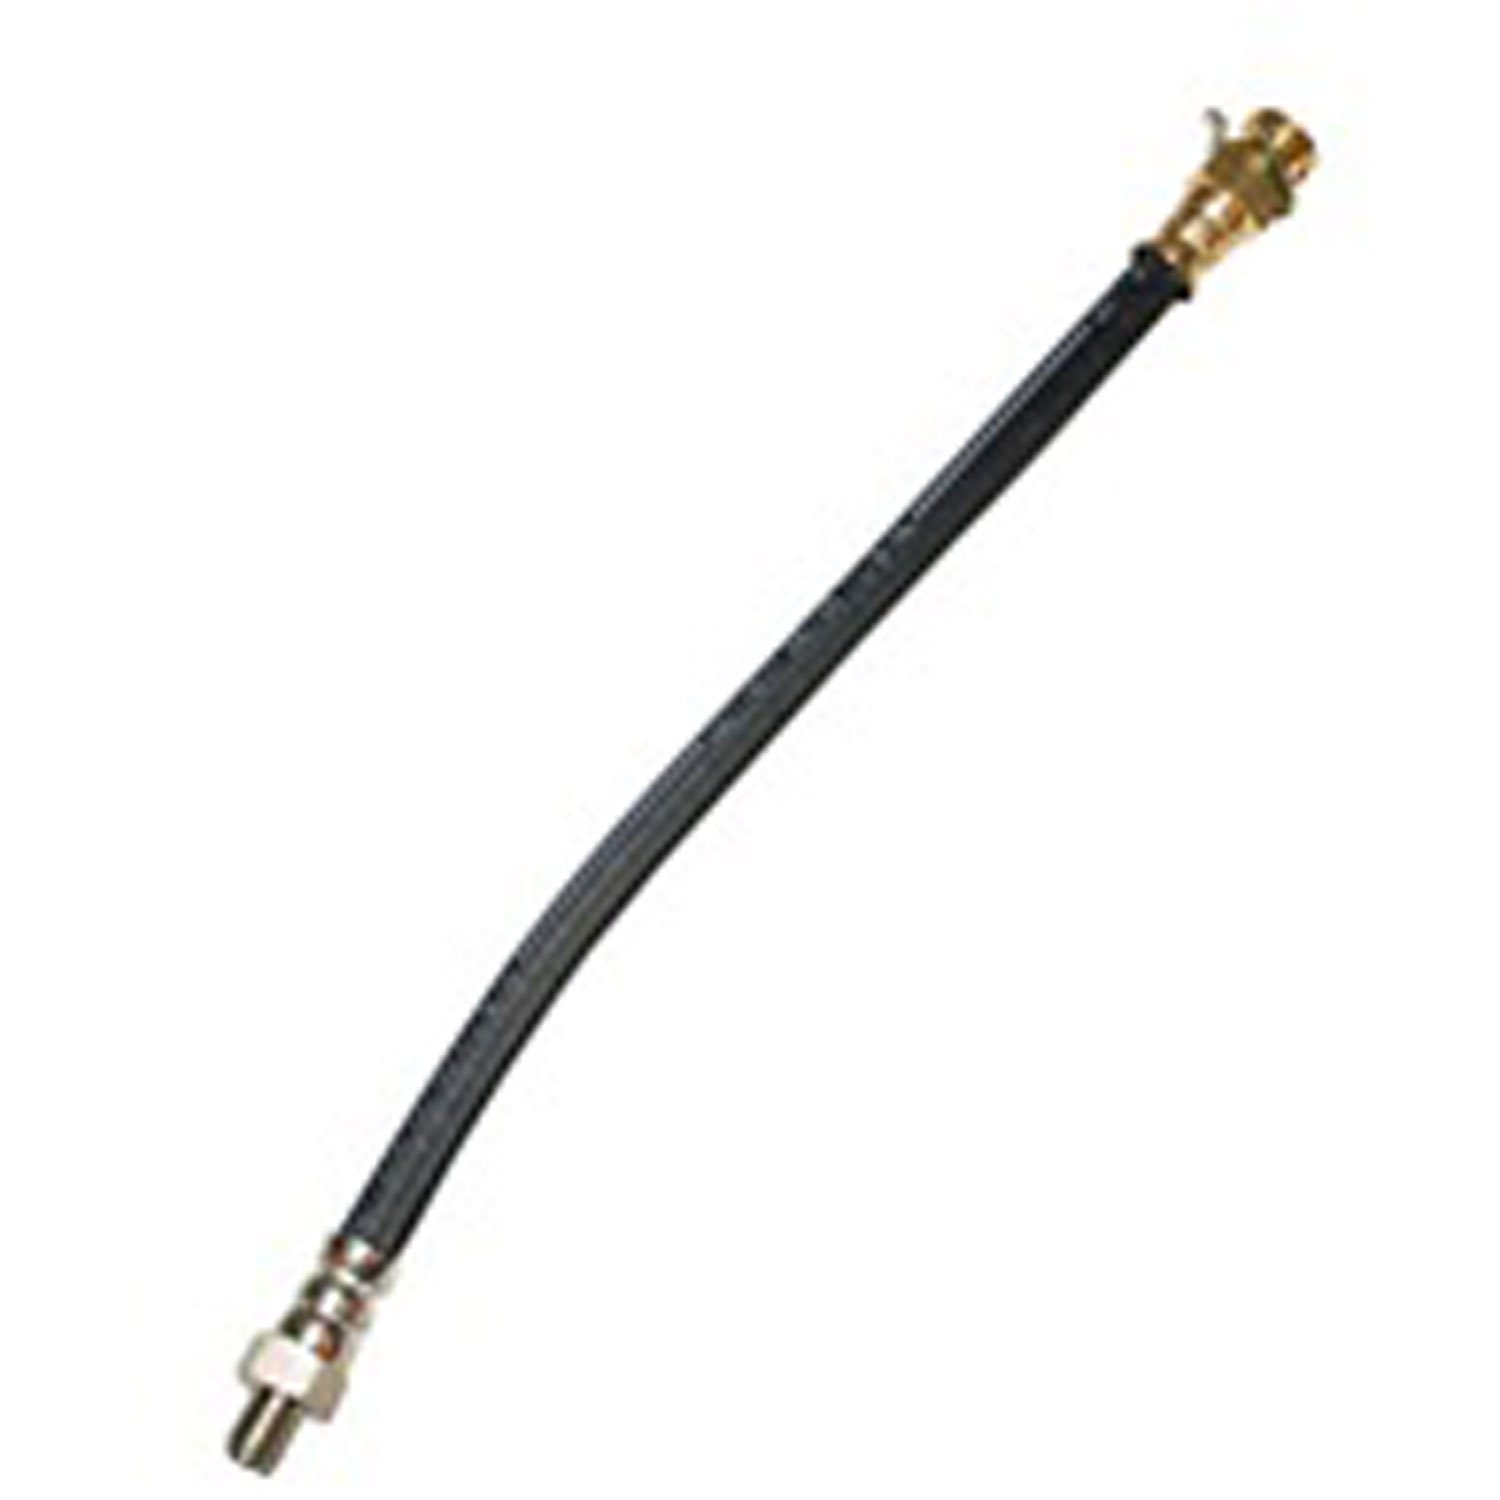 This flexible 12 1/4 inch front brake hose